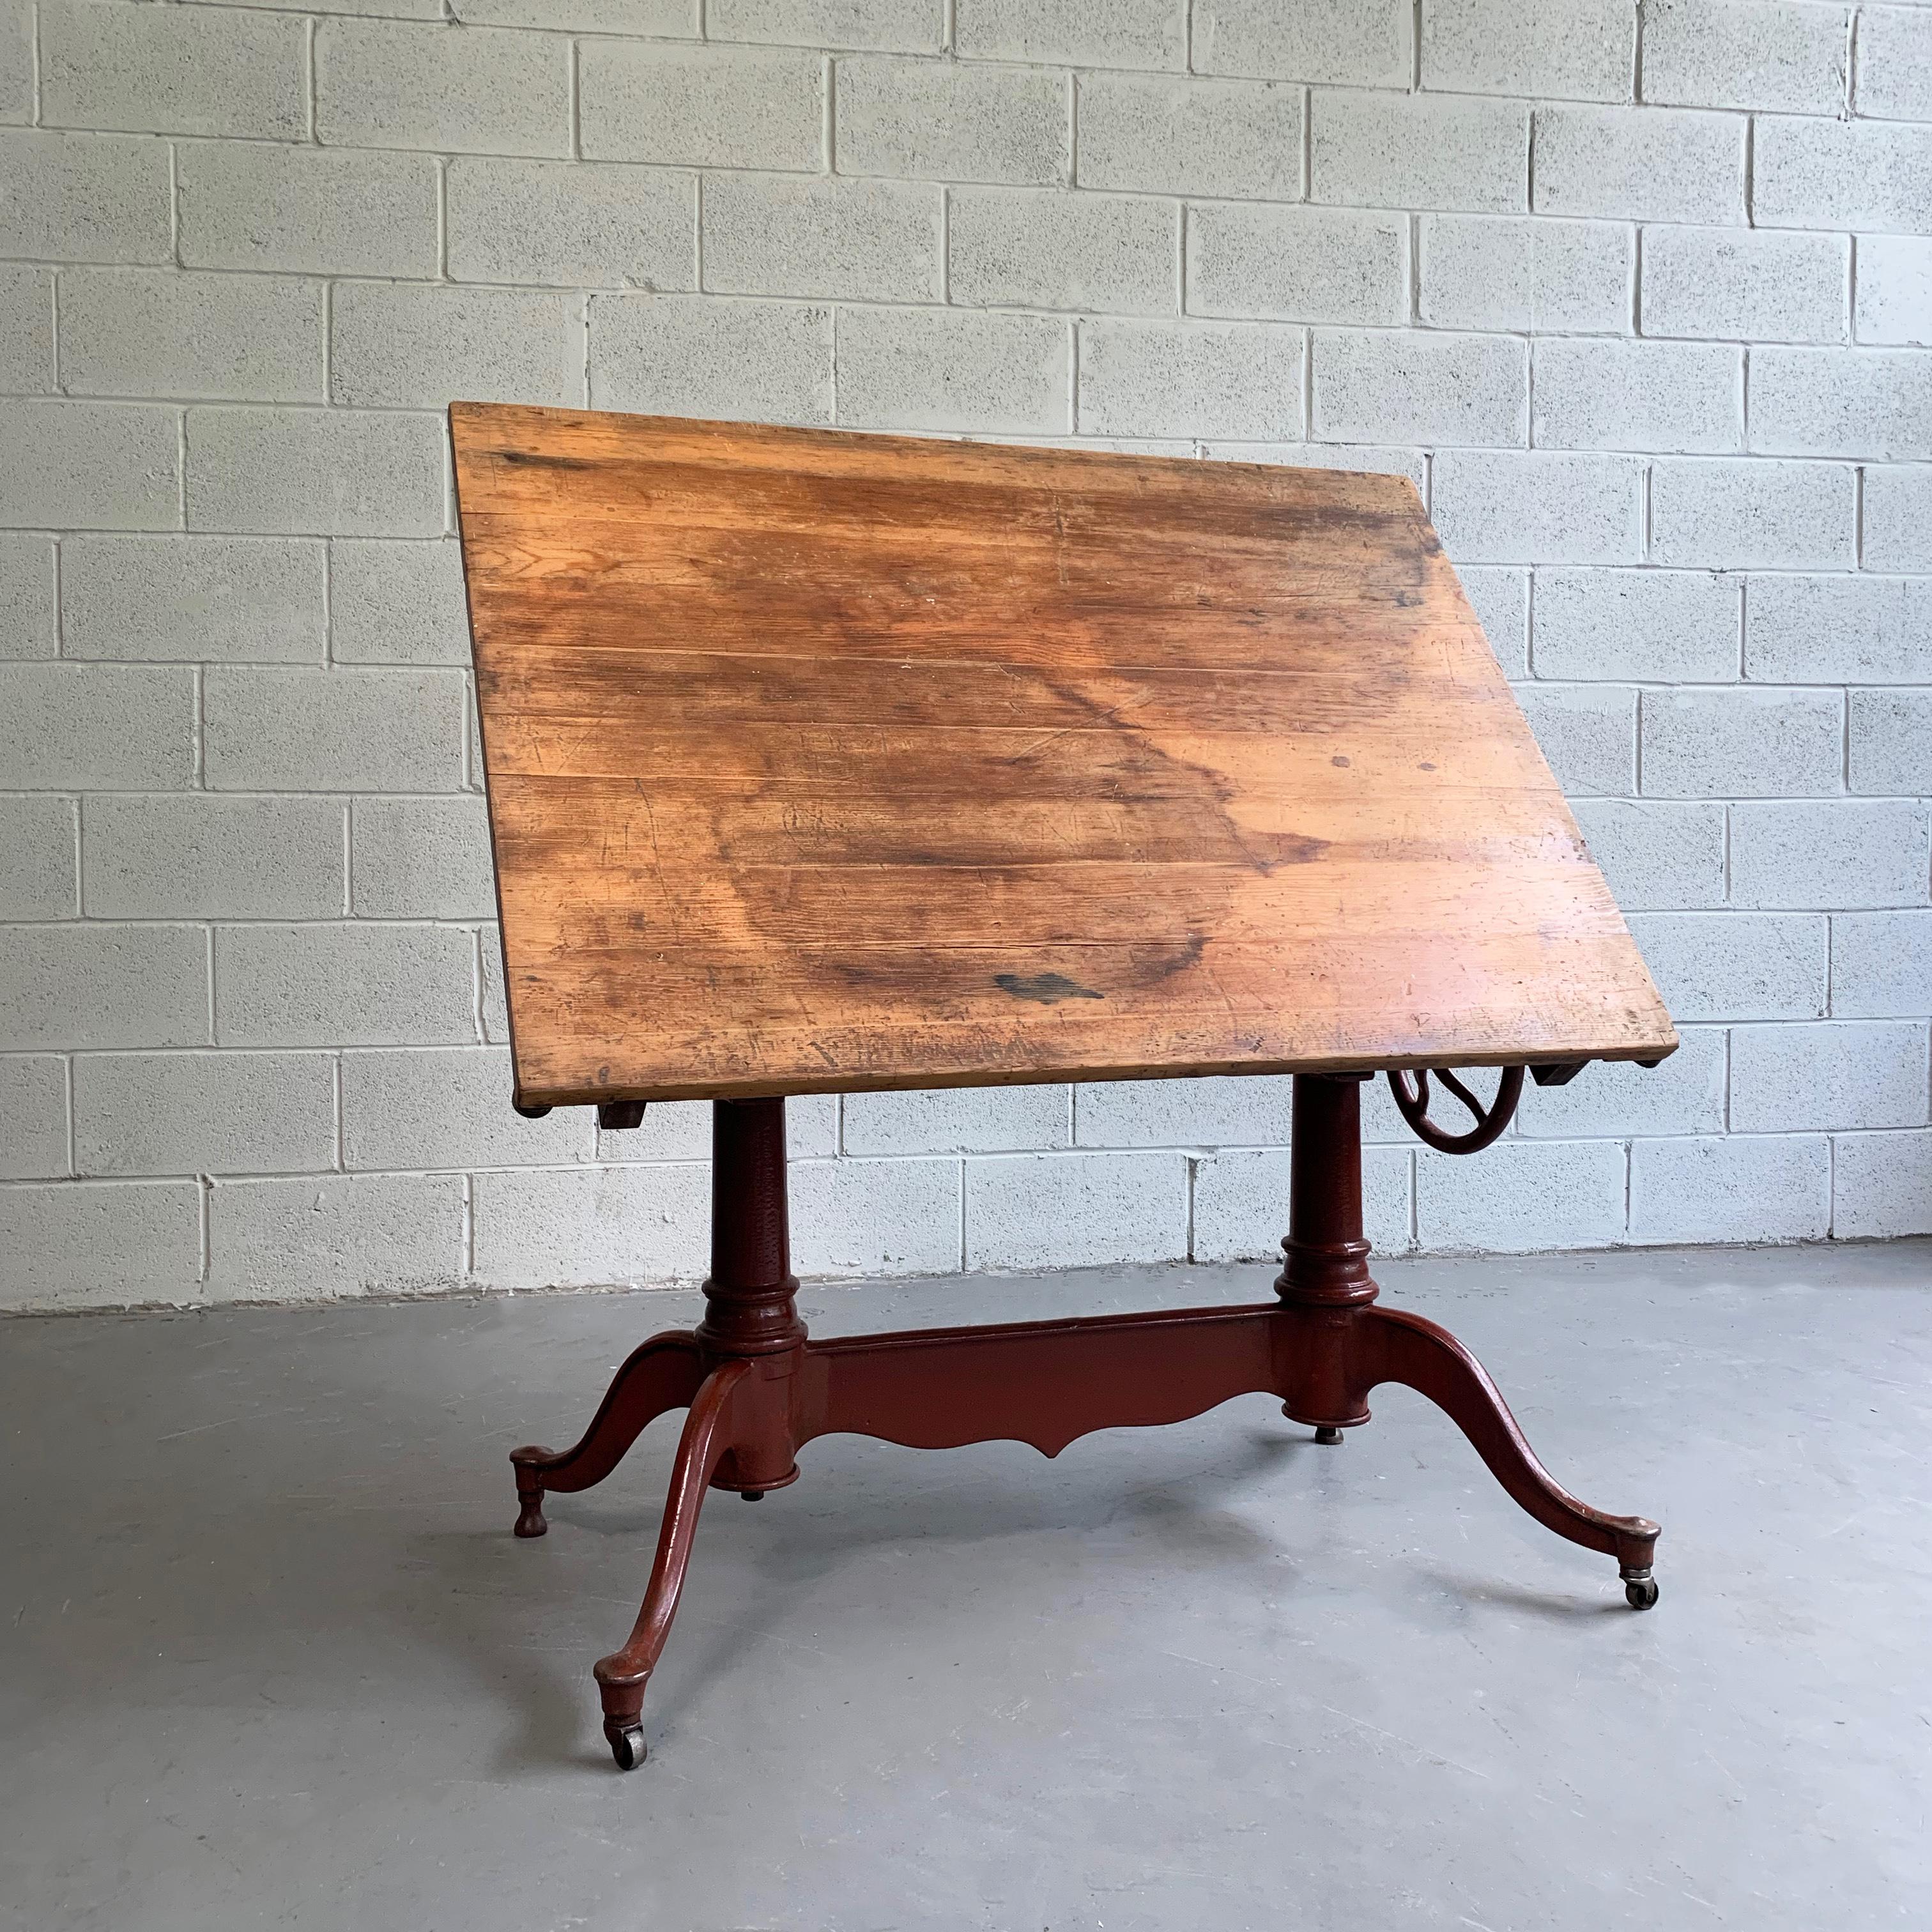 Antique, late 19th century, drafting table features a painted, cast iron base with an original pine top. The table is fully tilt adjustable and height adjustable from 32.5 - 46 inches. The foot print is 40 x 24 inches.